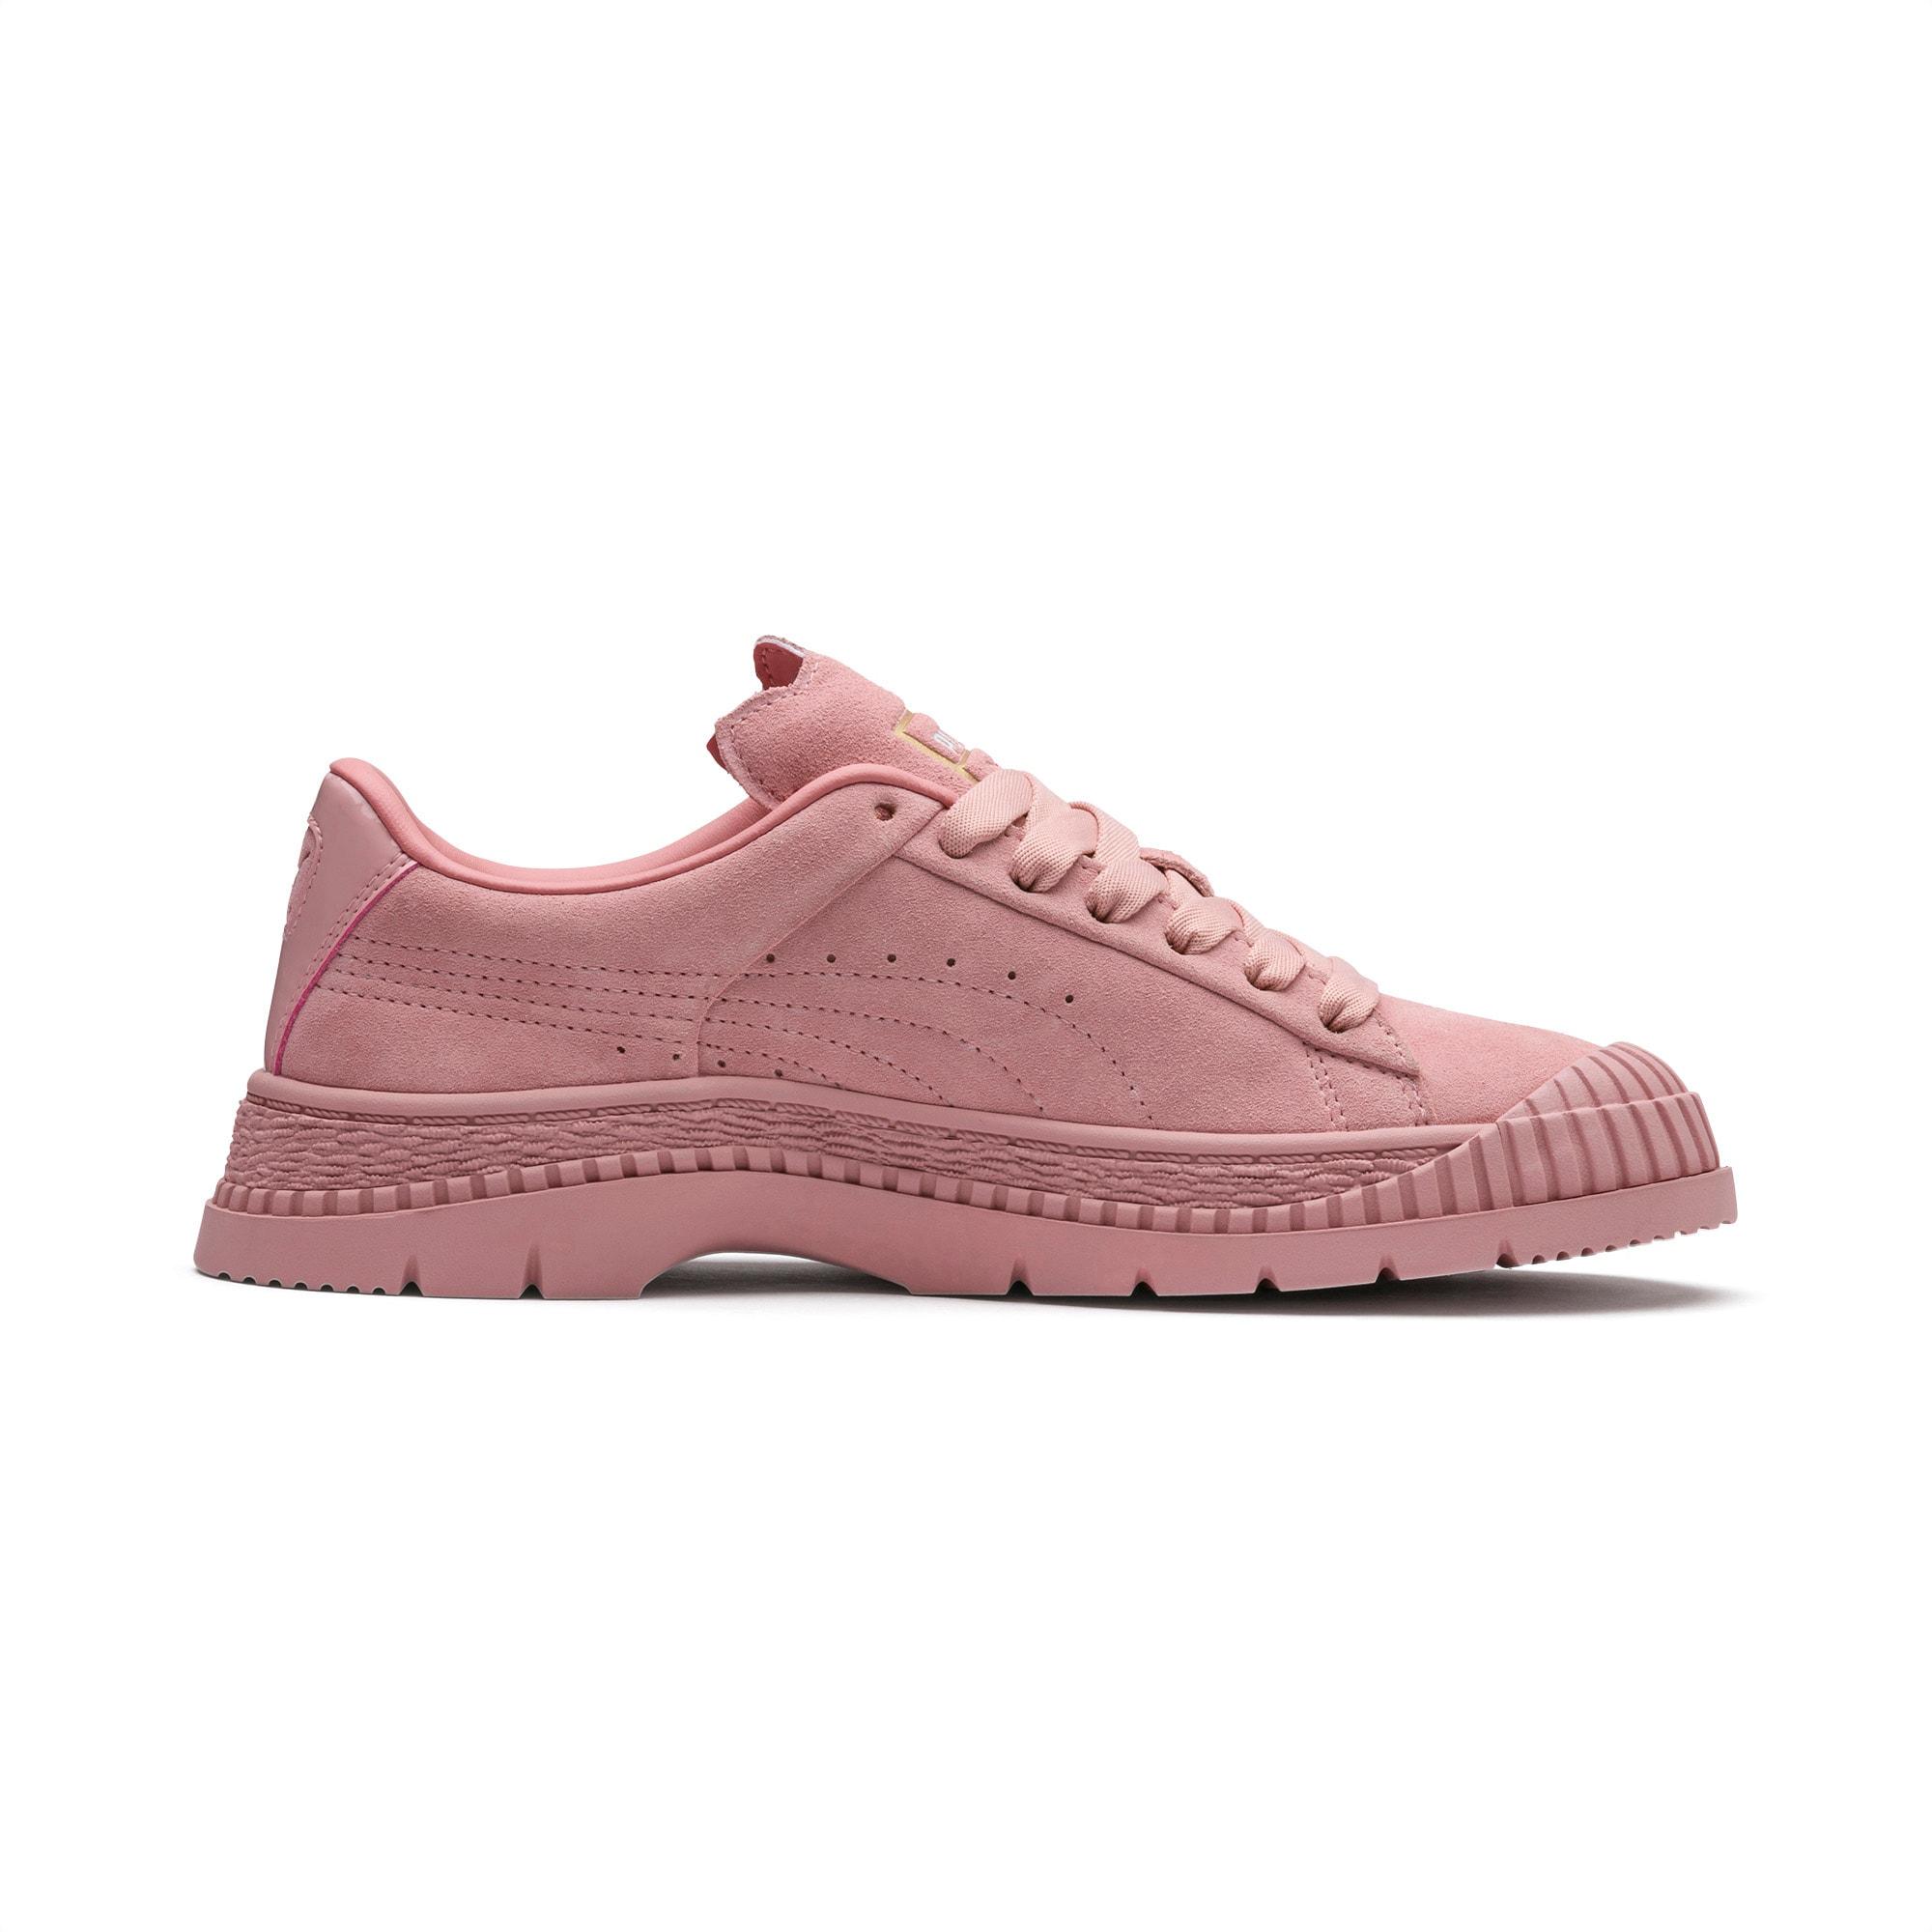 PUMA Suede X Hello Kitty Utility Women's Sneakers in Pink | Lyst